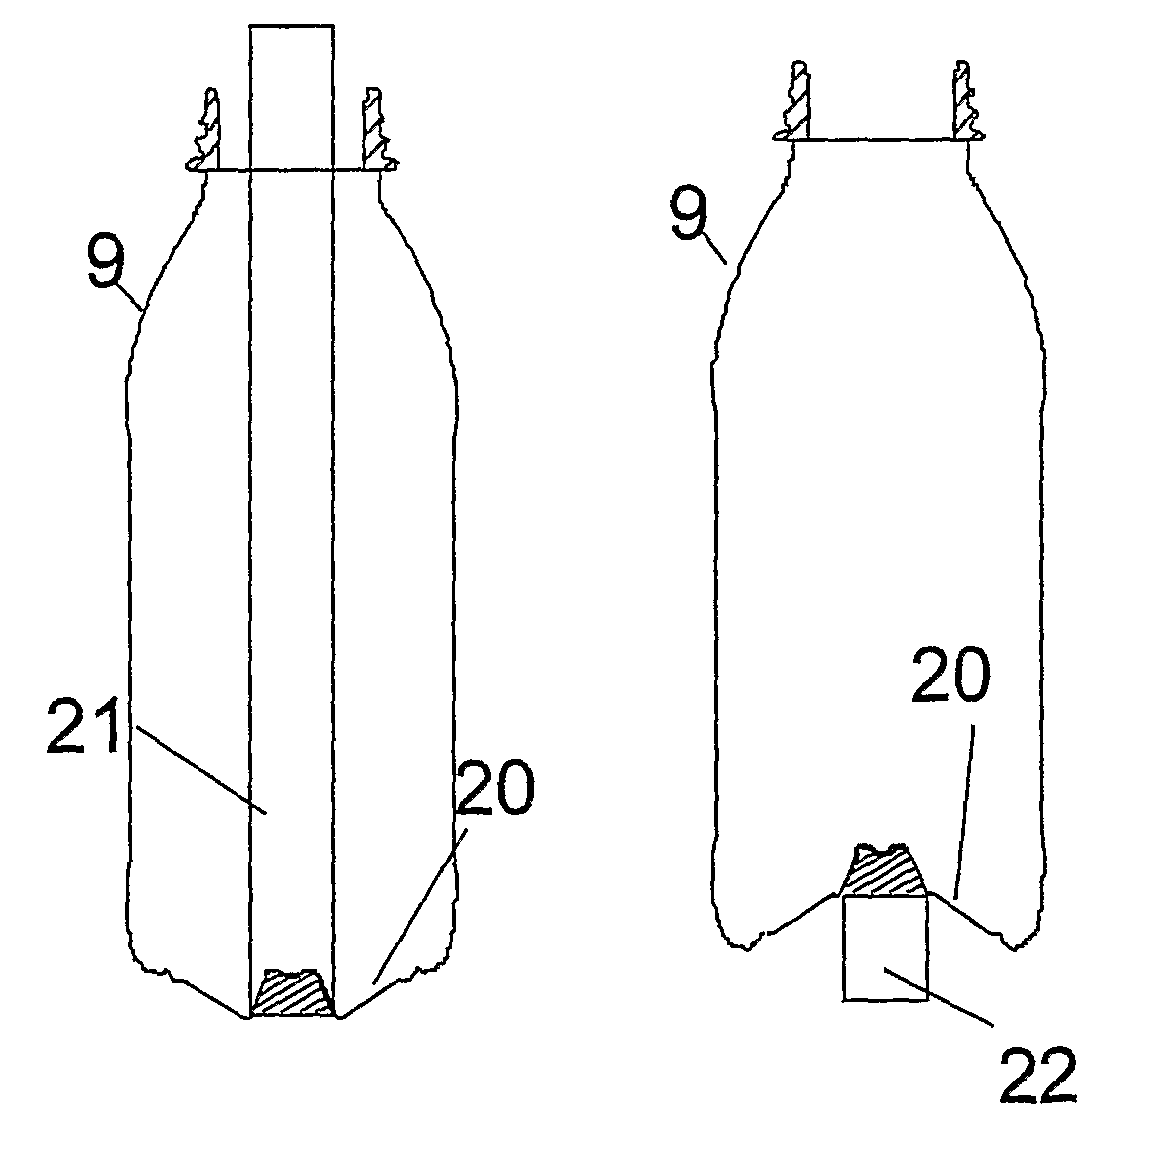 Method of processing a container and base cup structure for removal of vacuum pressure